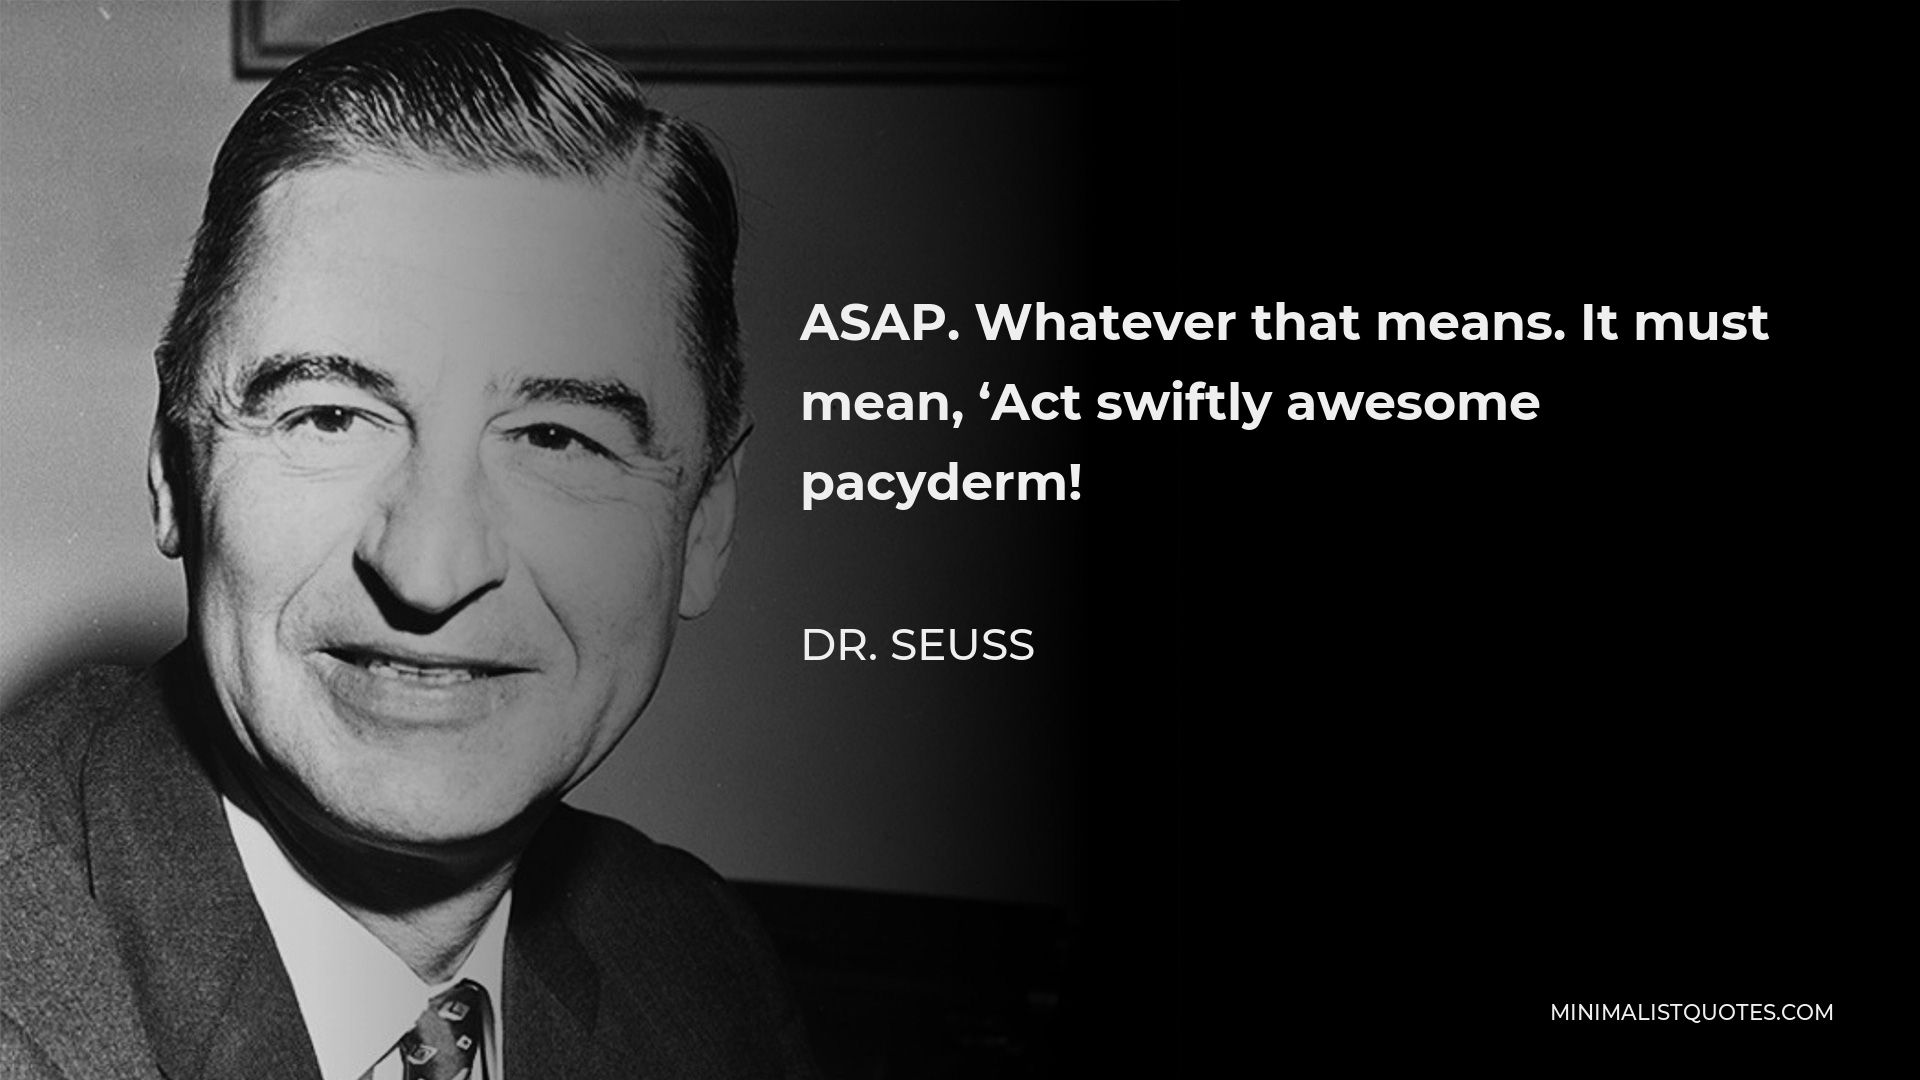 Dr. Seuss Quote - ASAP. Whatever that means. It must mean, ‘Act swiftly awesome pacyderm!